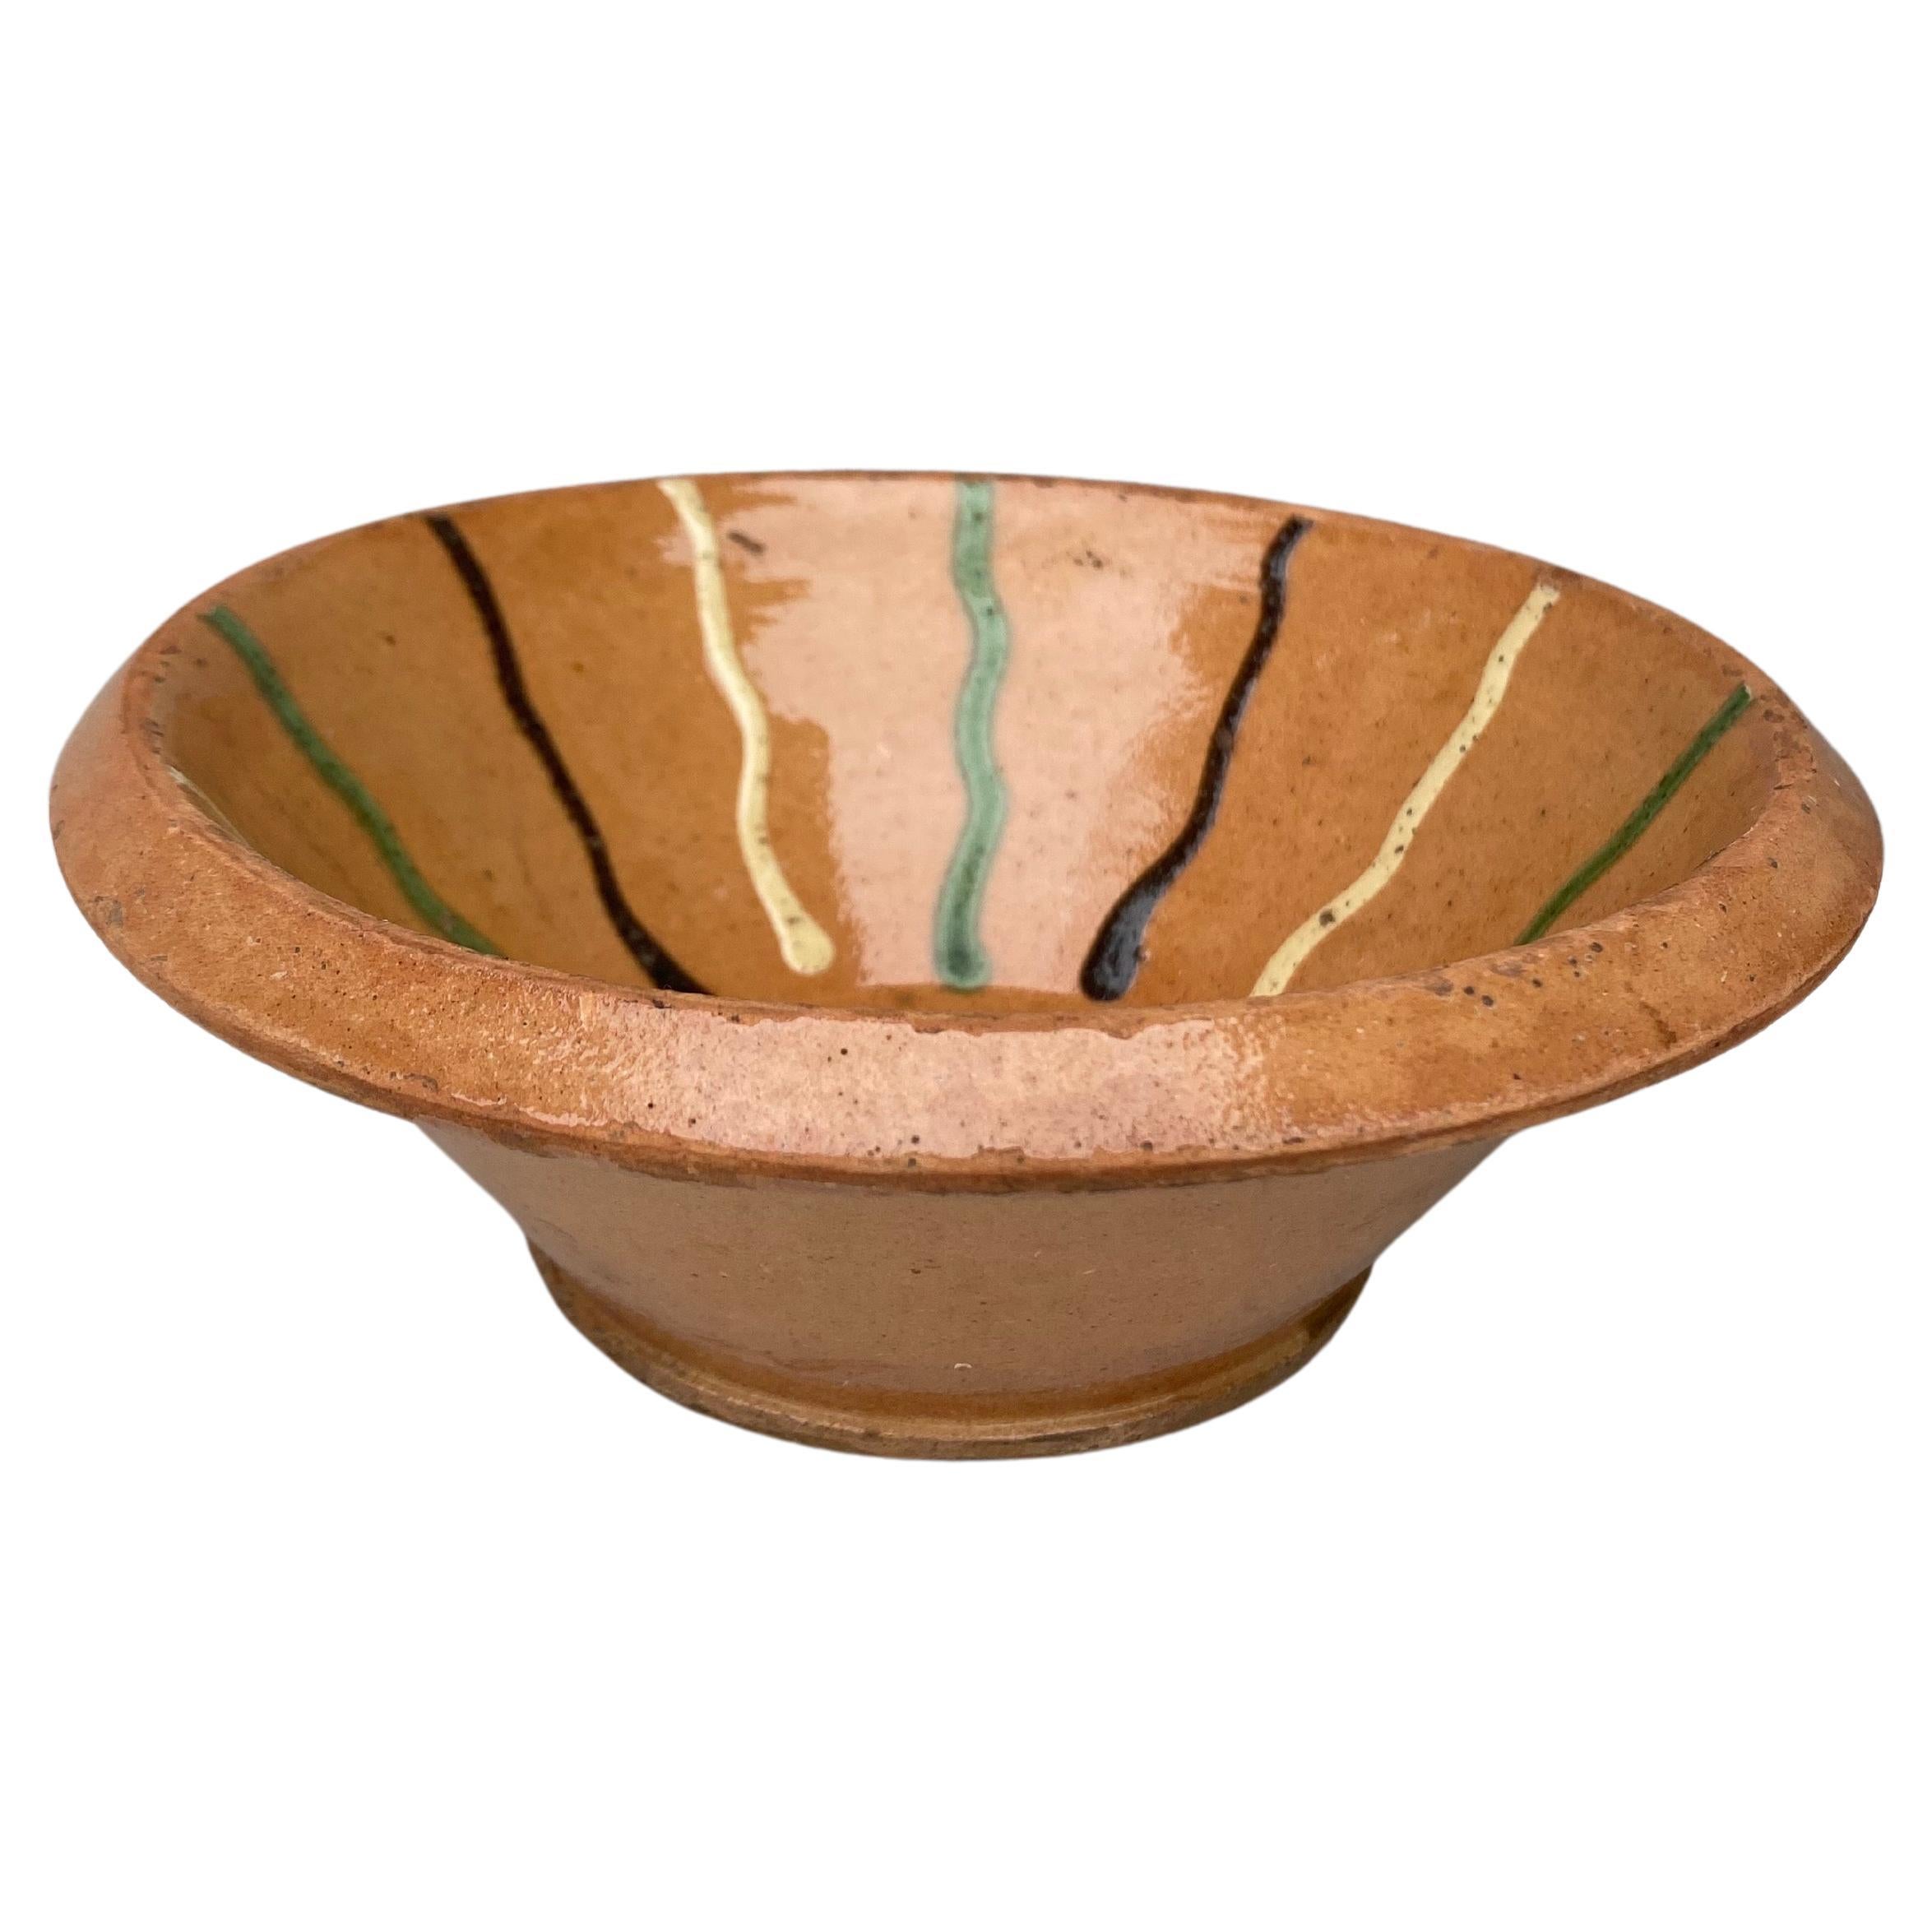 19th Century Rustic French Pottery Bowl from Savoie.